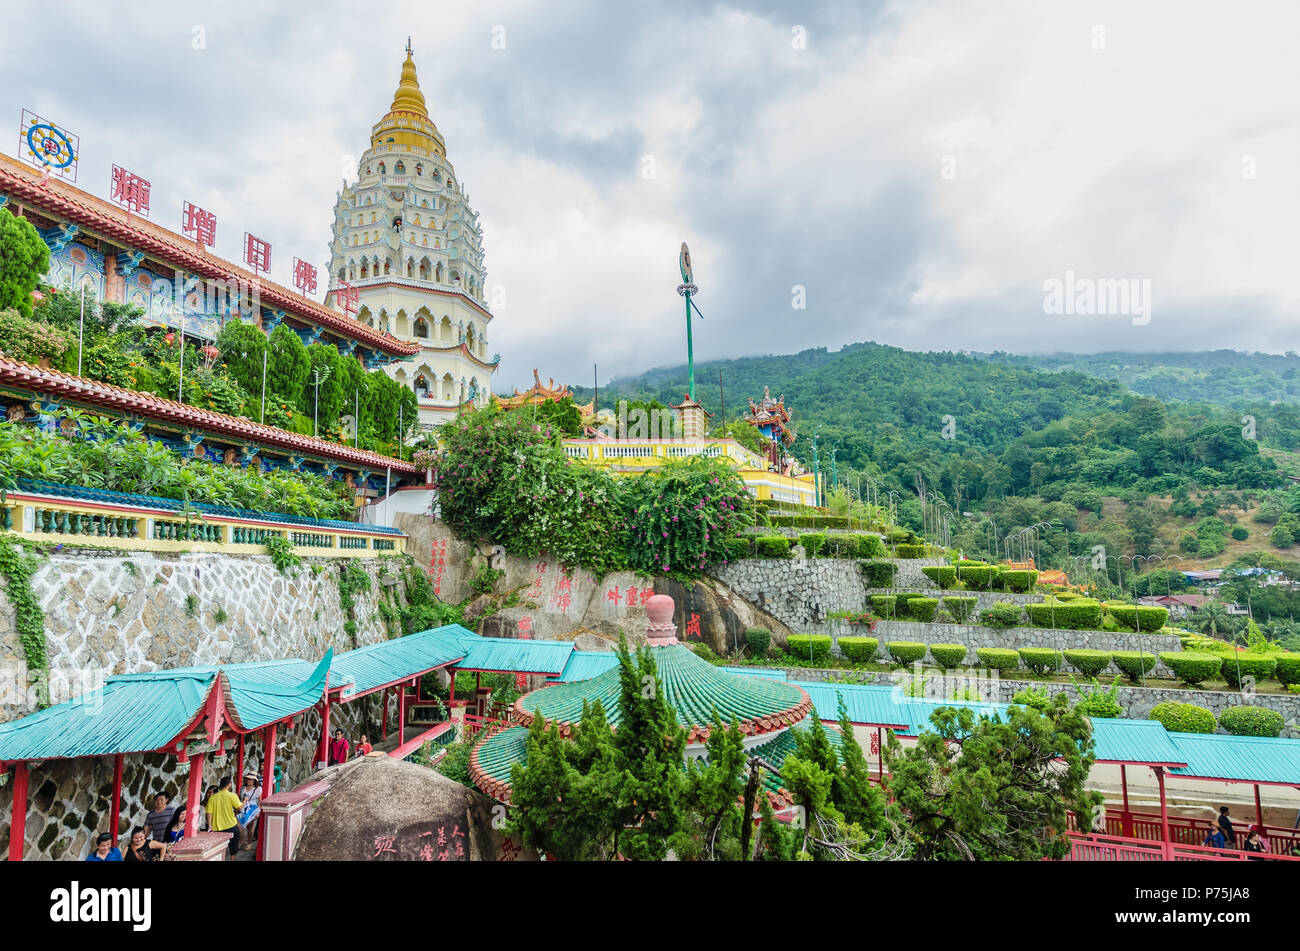 Penang,Malaysia - July 19,2015 : Kek Lok Si temple a Buddhist temple situated in Air Itam in Penang.It is one of the best known temples on the island. Stock Photo